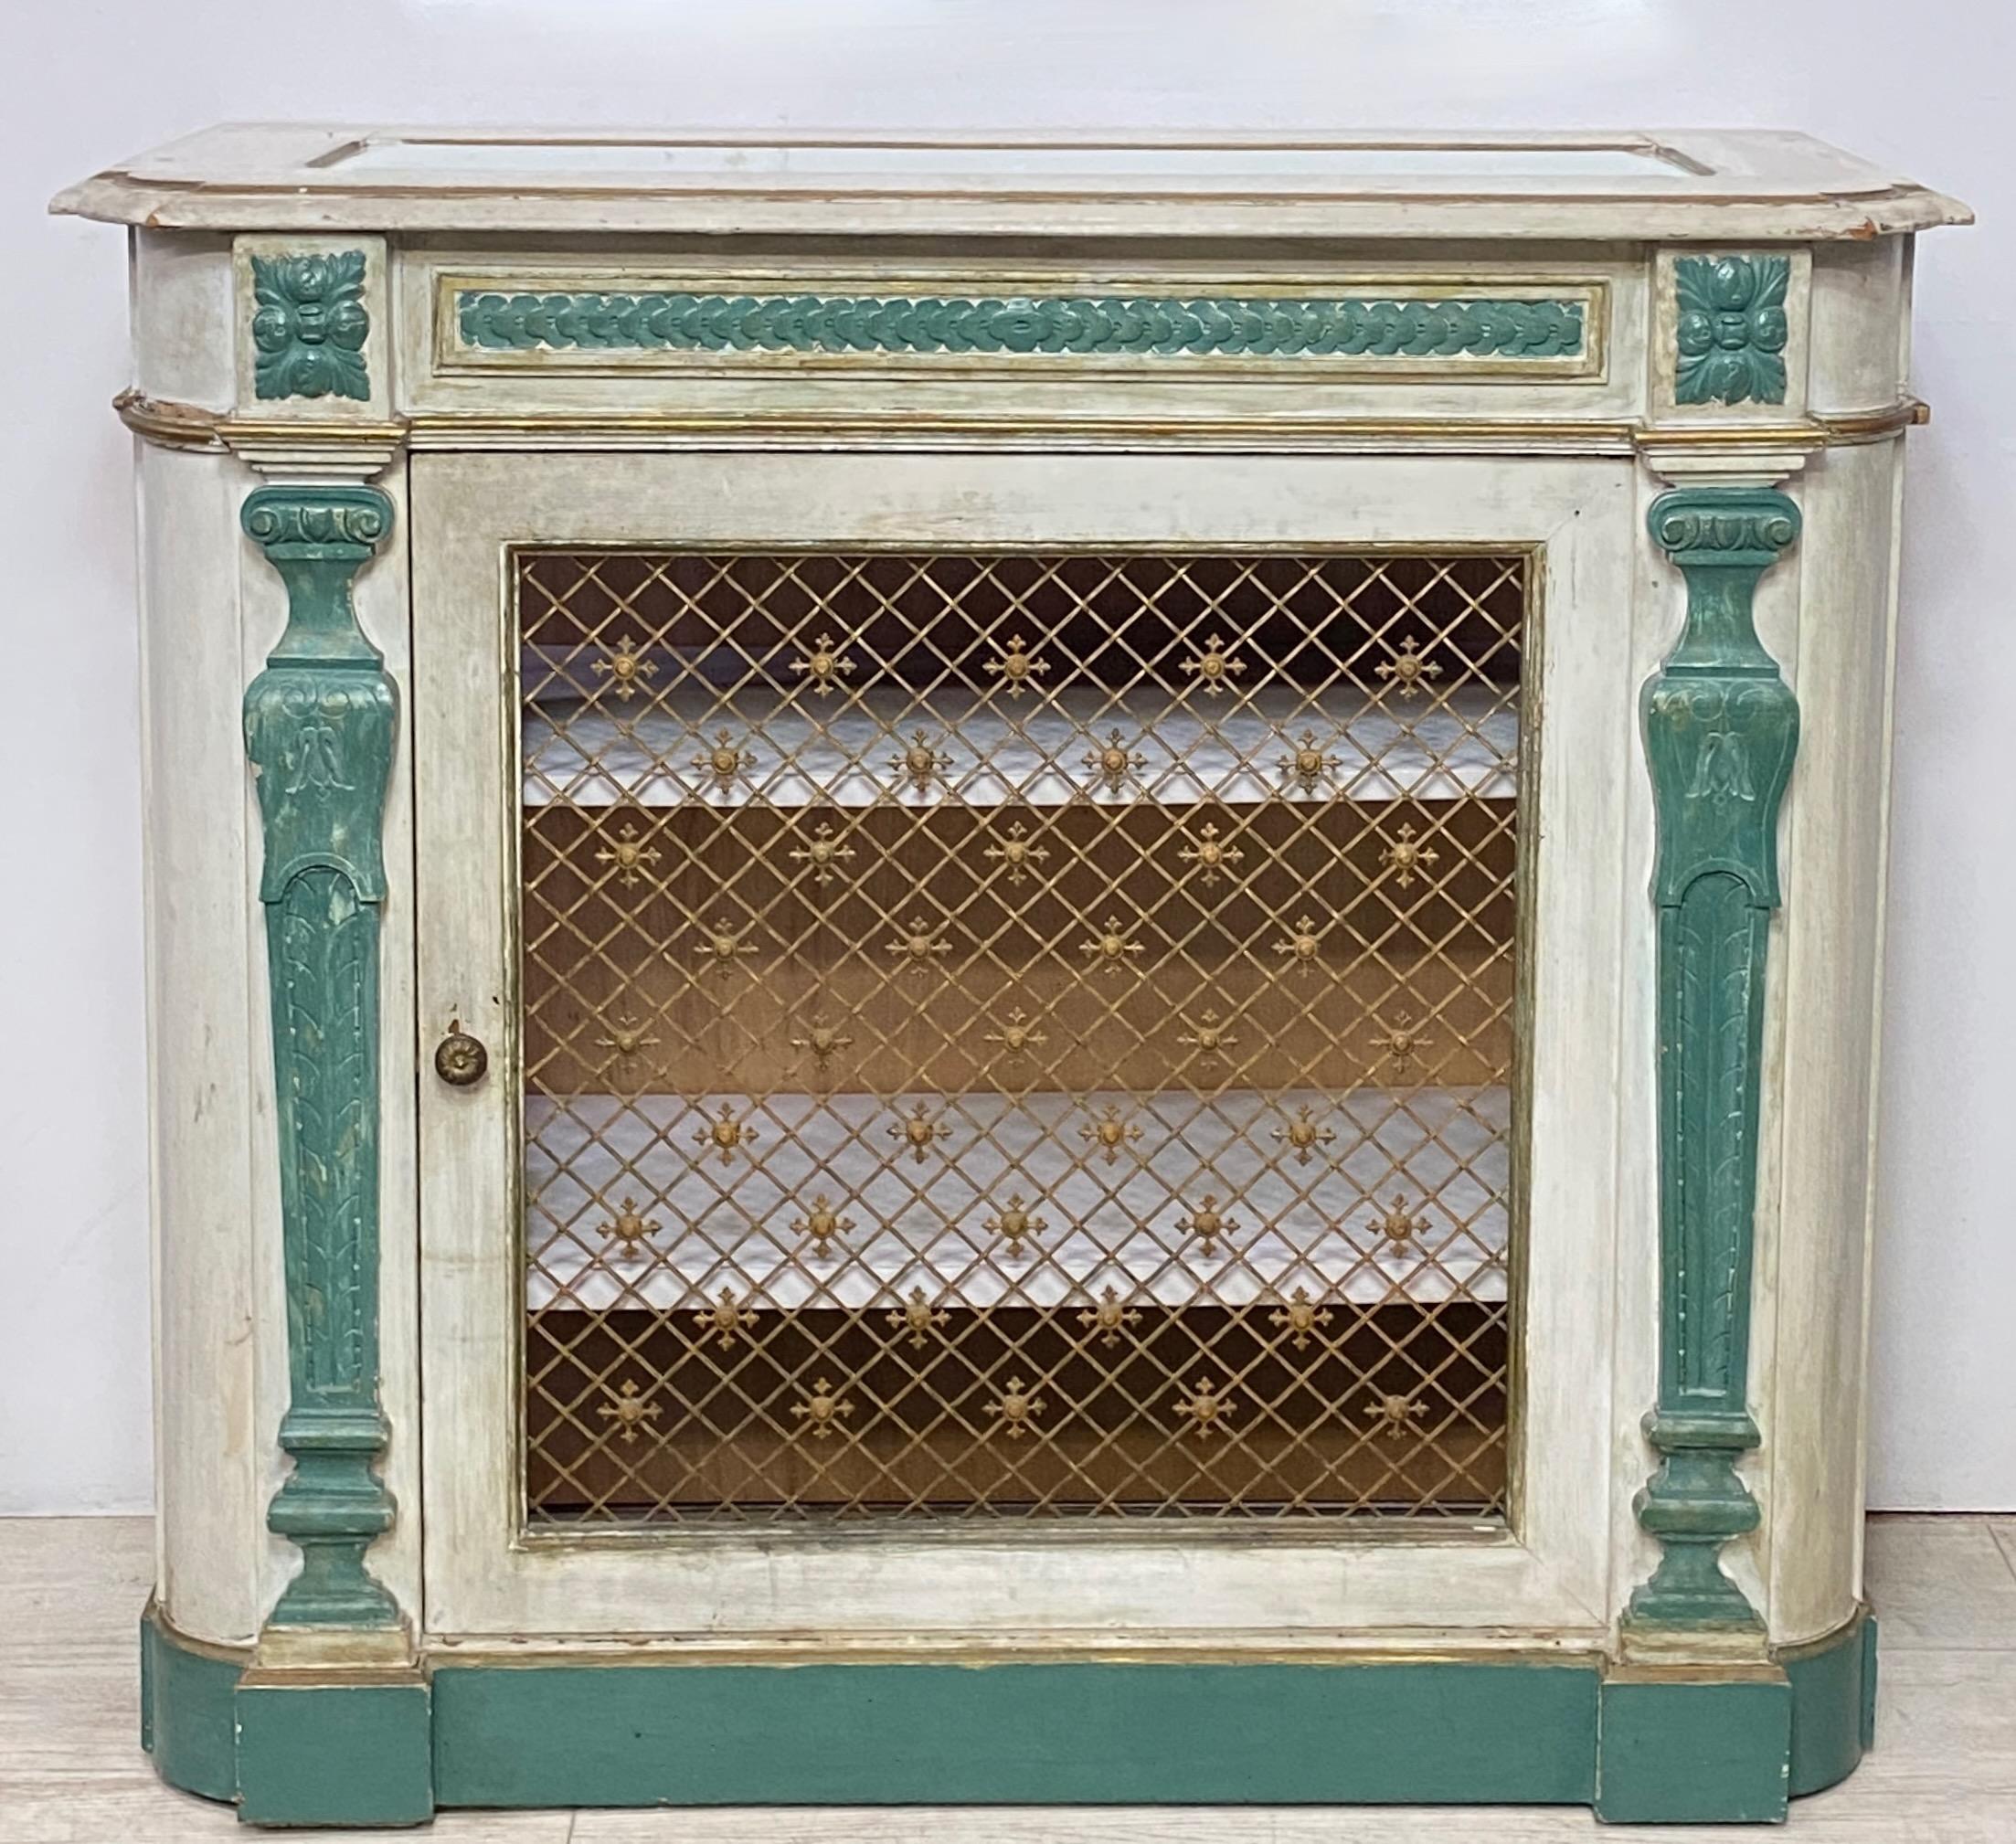 Originally custom crafted as a radiator cover (c. 1920) with decorative metal grates in the door and sides
Original paint. 
Inset beveled mirror top. 
It was converted to a stereo cabinet in the 1970s, and had silk fabric behind the 3 metal grates.